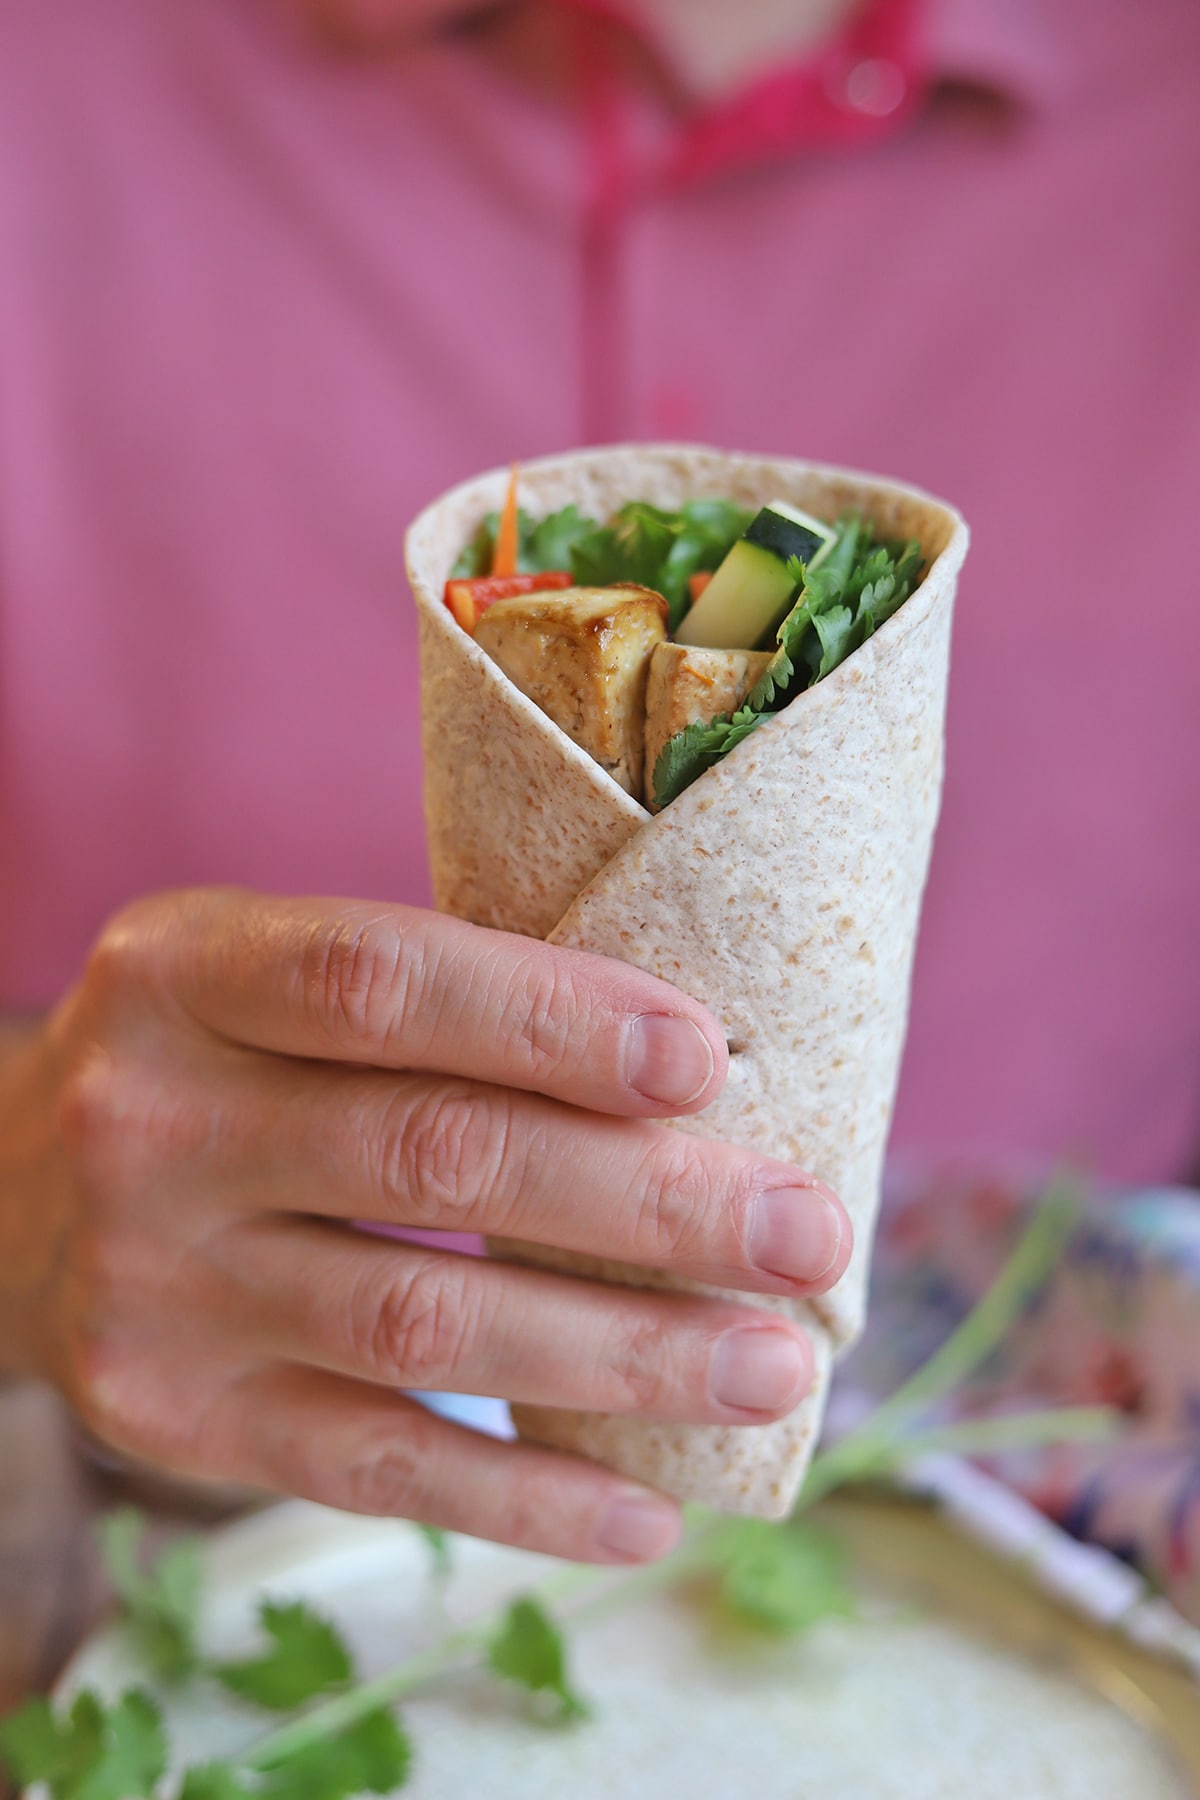 Hand holding wrap with tofu, lettuce, and carrots.